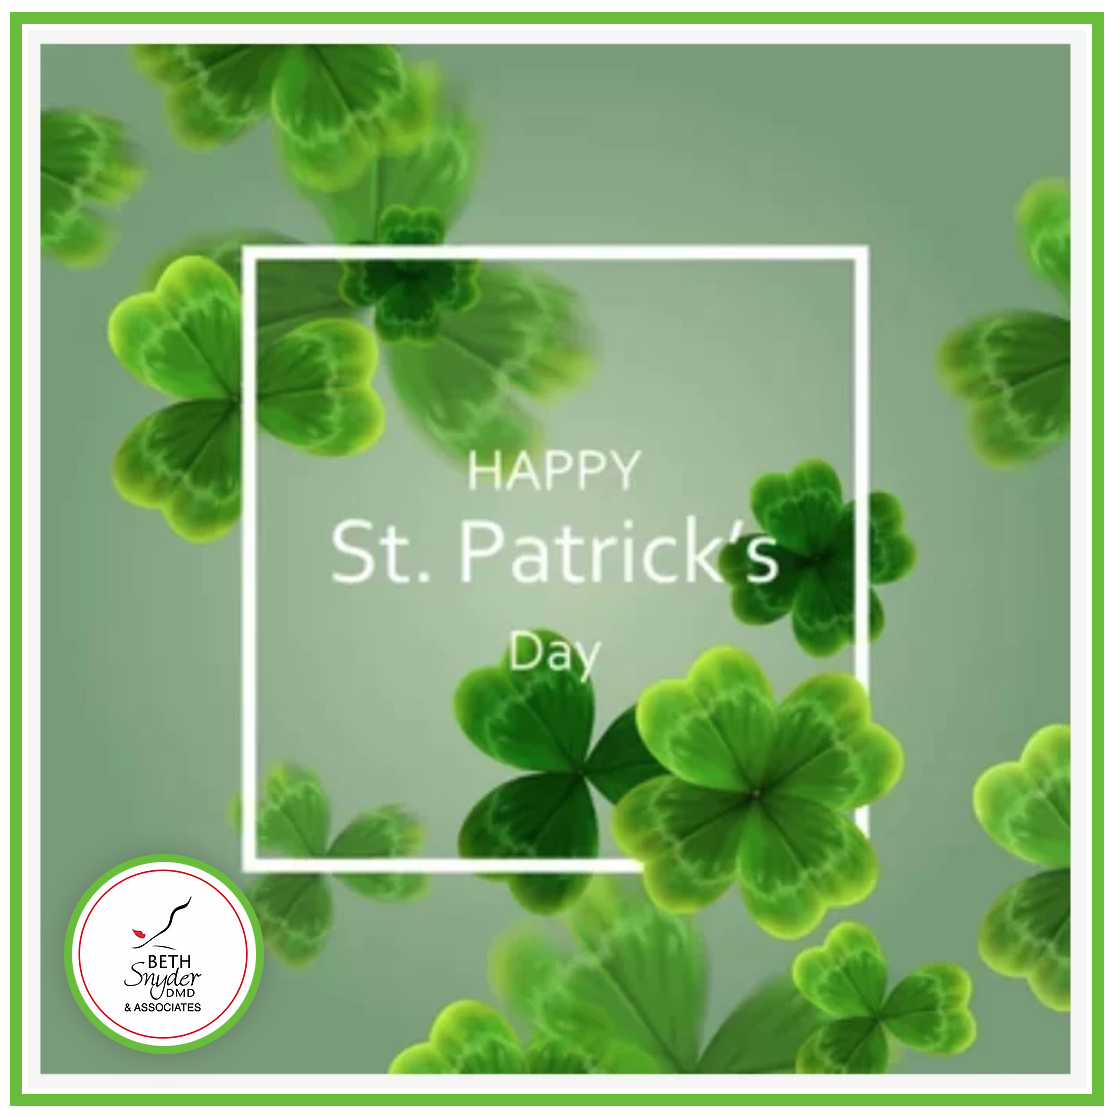 Happy St. Patrick's Day!
May your pockets be heavy, and your heart be light. 
Make good luck pursue you each morning and night. 
-  An Irish blessing 

https://t.co/yY0rVmsDGv
(215) 346-7462   
#HappySaintPatrick'sDay #KeepSmiling #LuckyDay #Leprechauns https://t.co/DfRxmTajH3